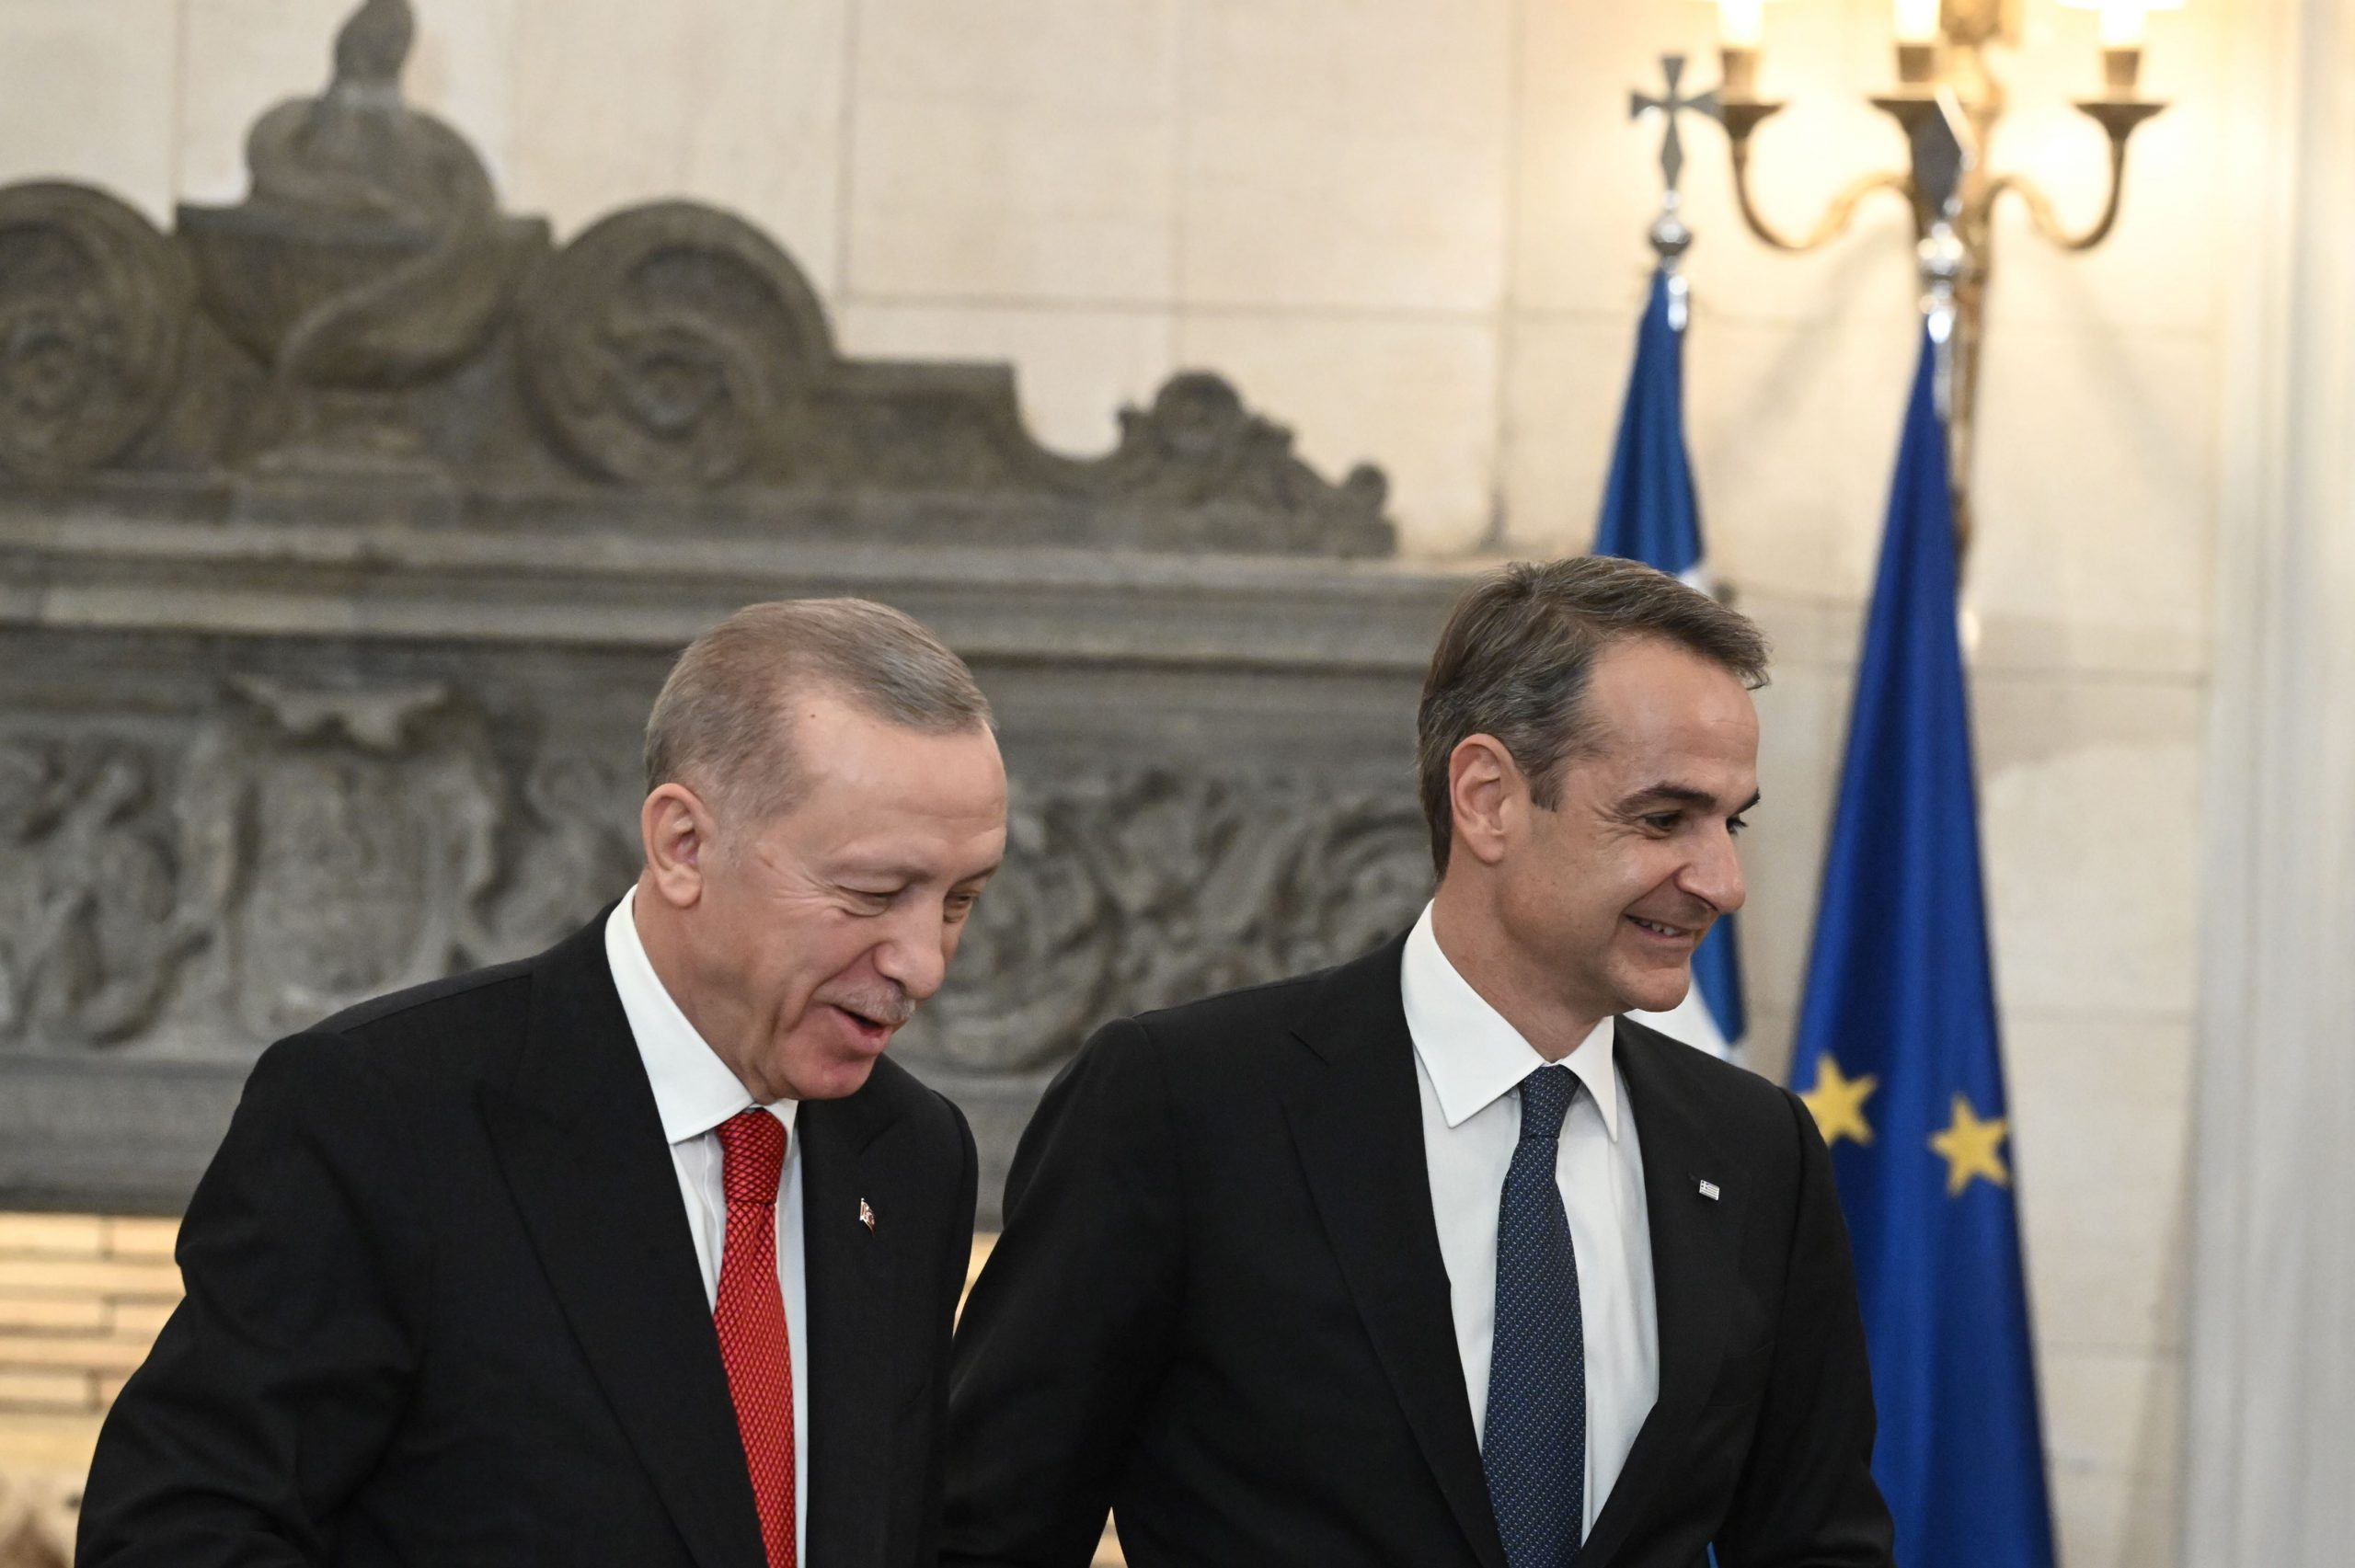 Greece & Turkey Commit to Friendly Relations: The Athens Declaration on Friendly Relations and Good-Neighbourliness